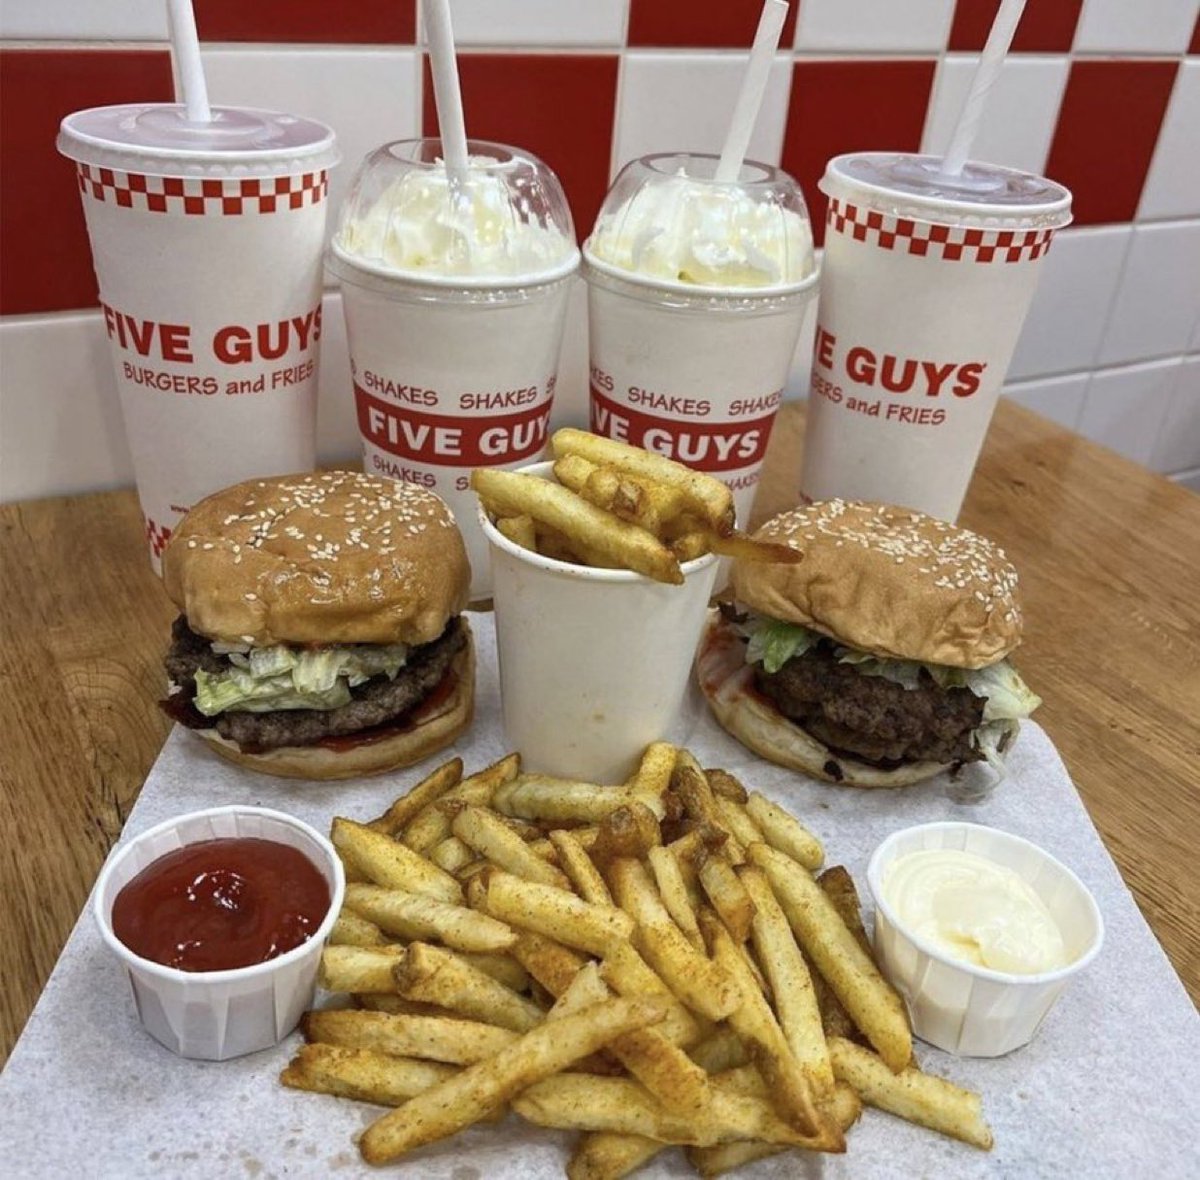 Honest Question….. Is Five Guys worth the price?